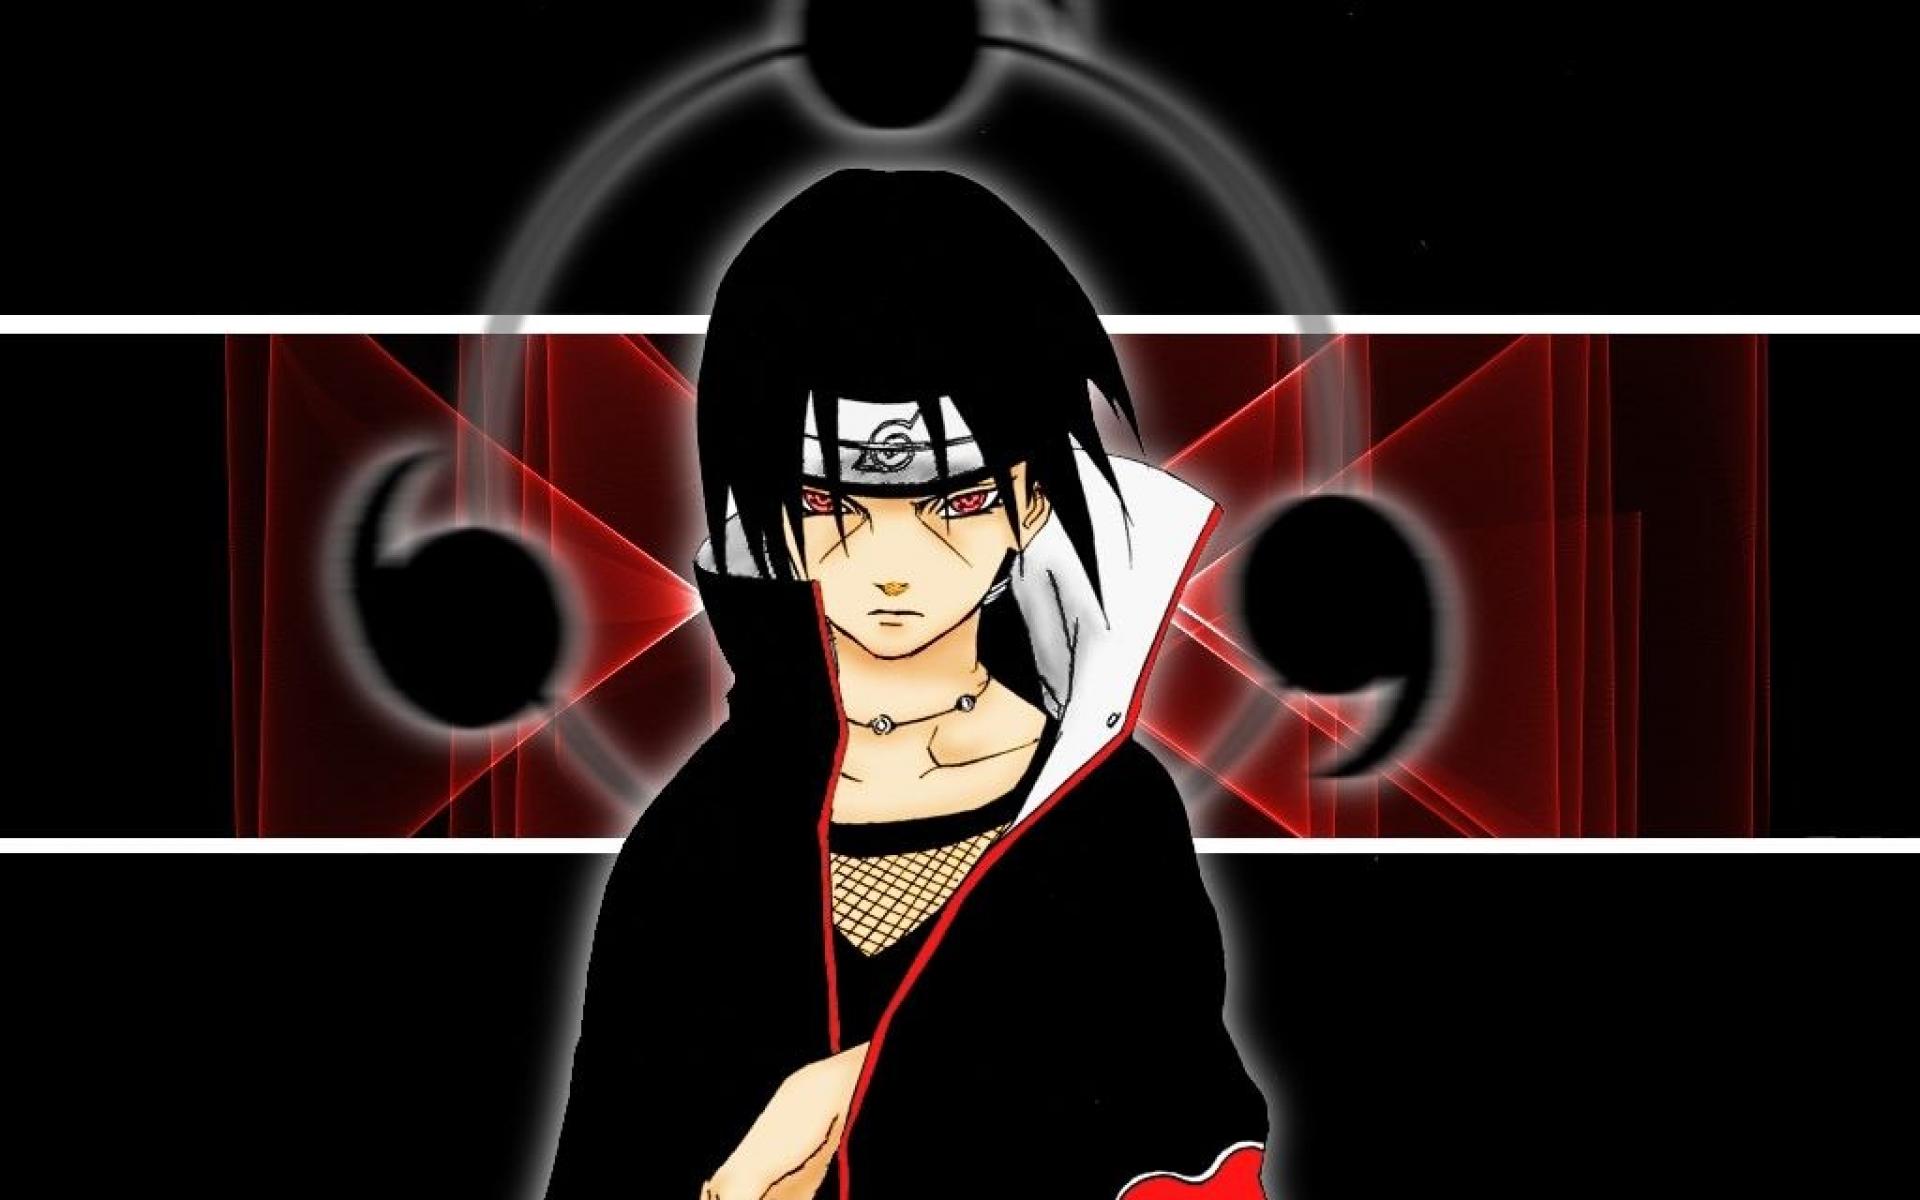 Itachi 4K wallpapers for your desktop or mobile screen free and easy to